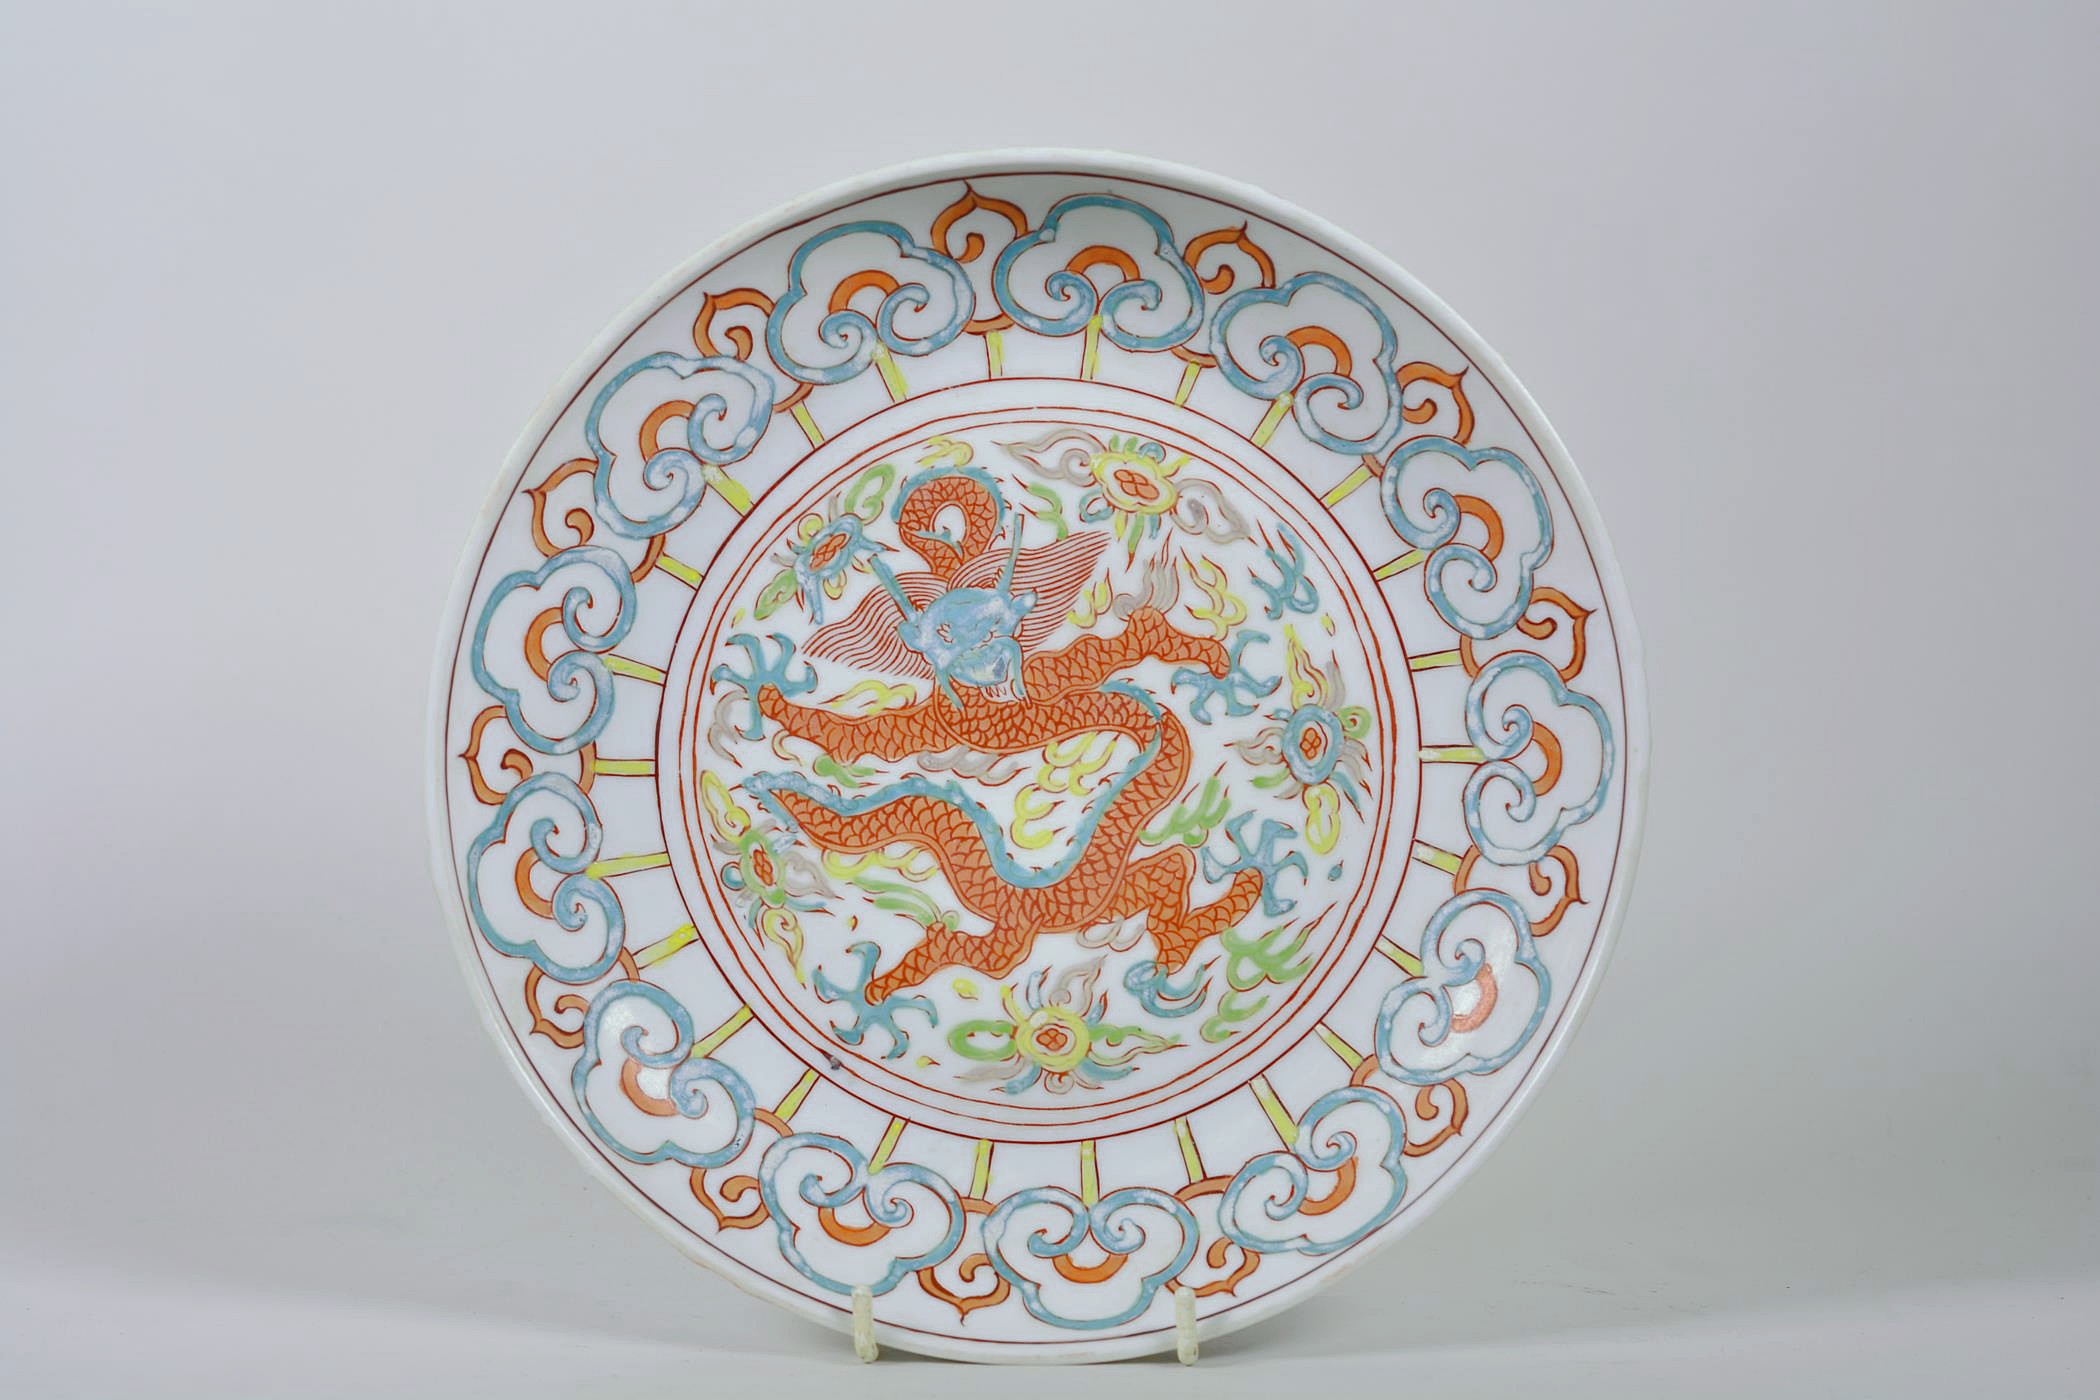 A Chinese polychrome porcelain dish decorated with a dragon and flaming pearl, 6 character mark to